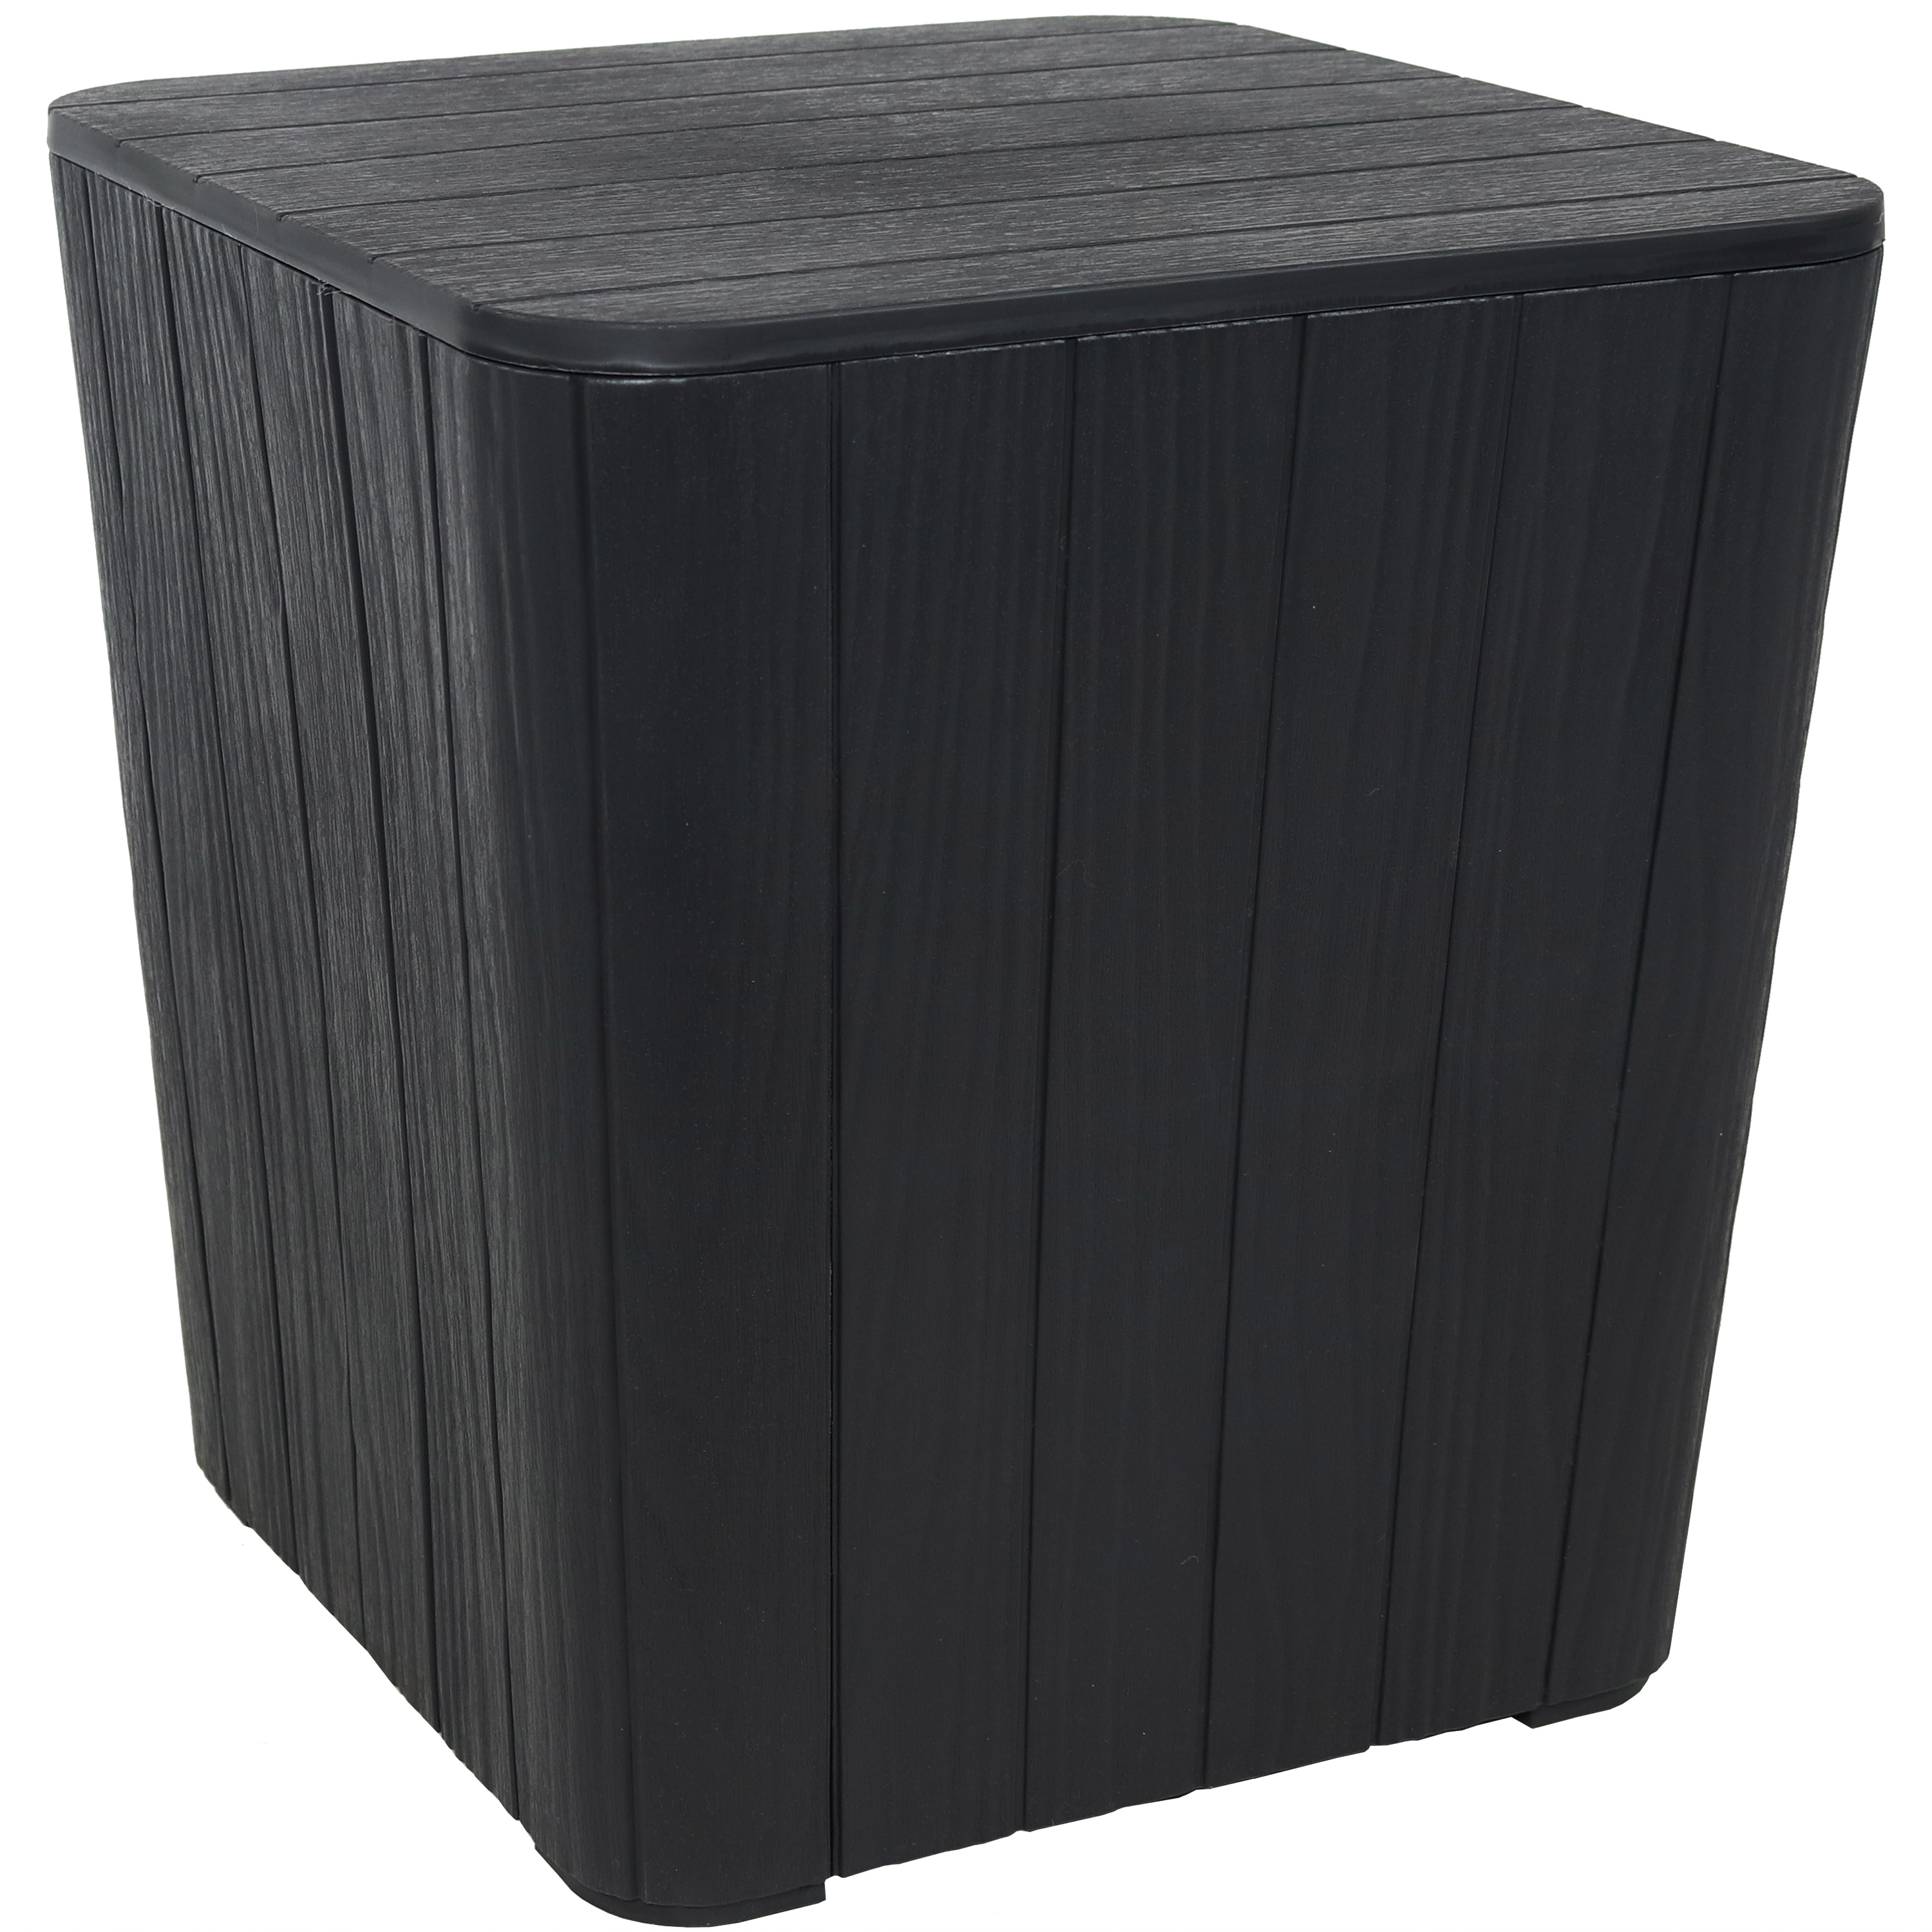 Faux Wood Design Outdoor Storage Box with Tabletop - Phantom Gray